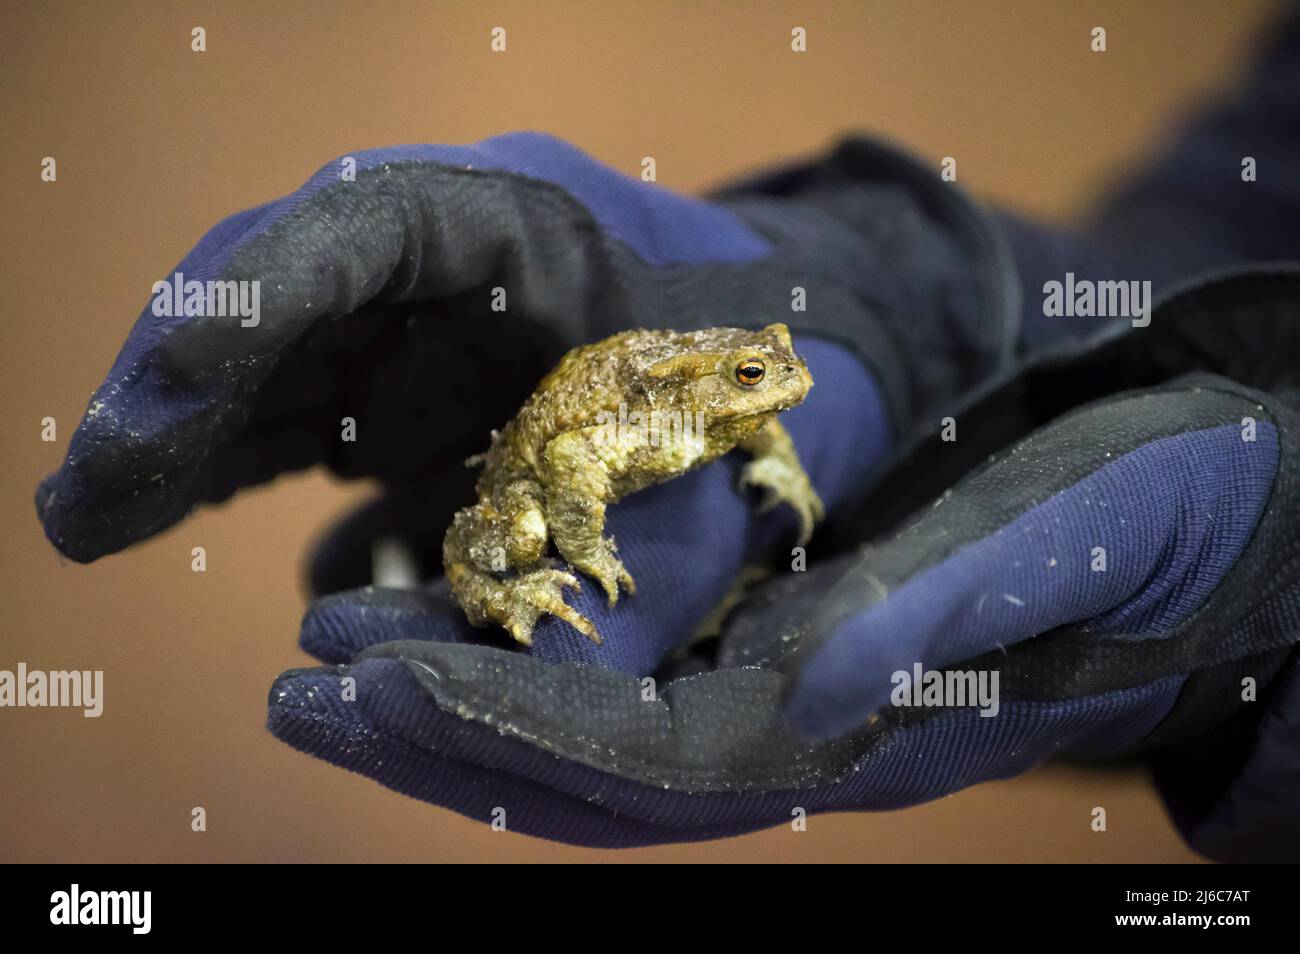 Close up view of hands in gloves holding a youn common toad, on brown background Stock Photo